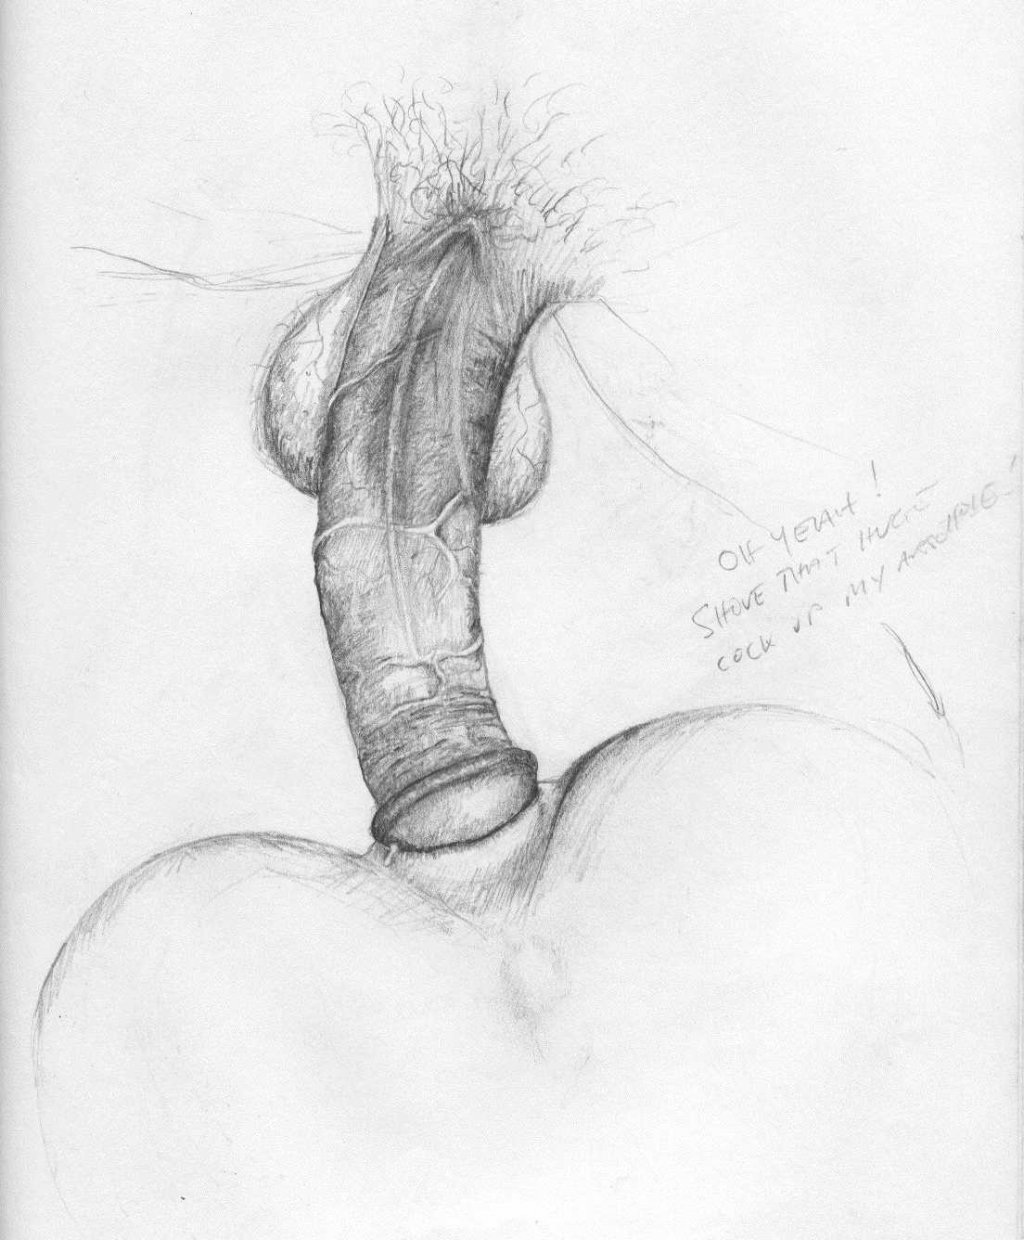 More related erotic pencil sketches.